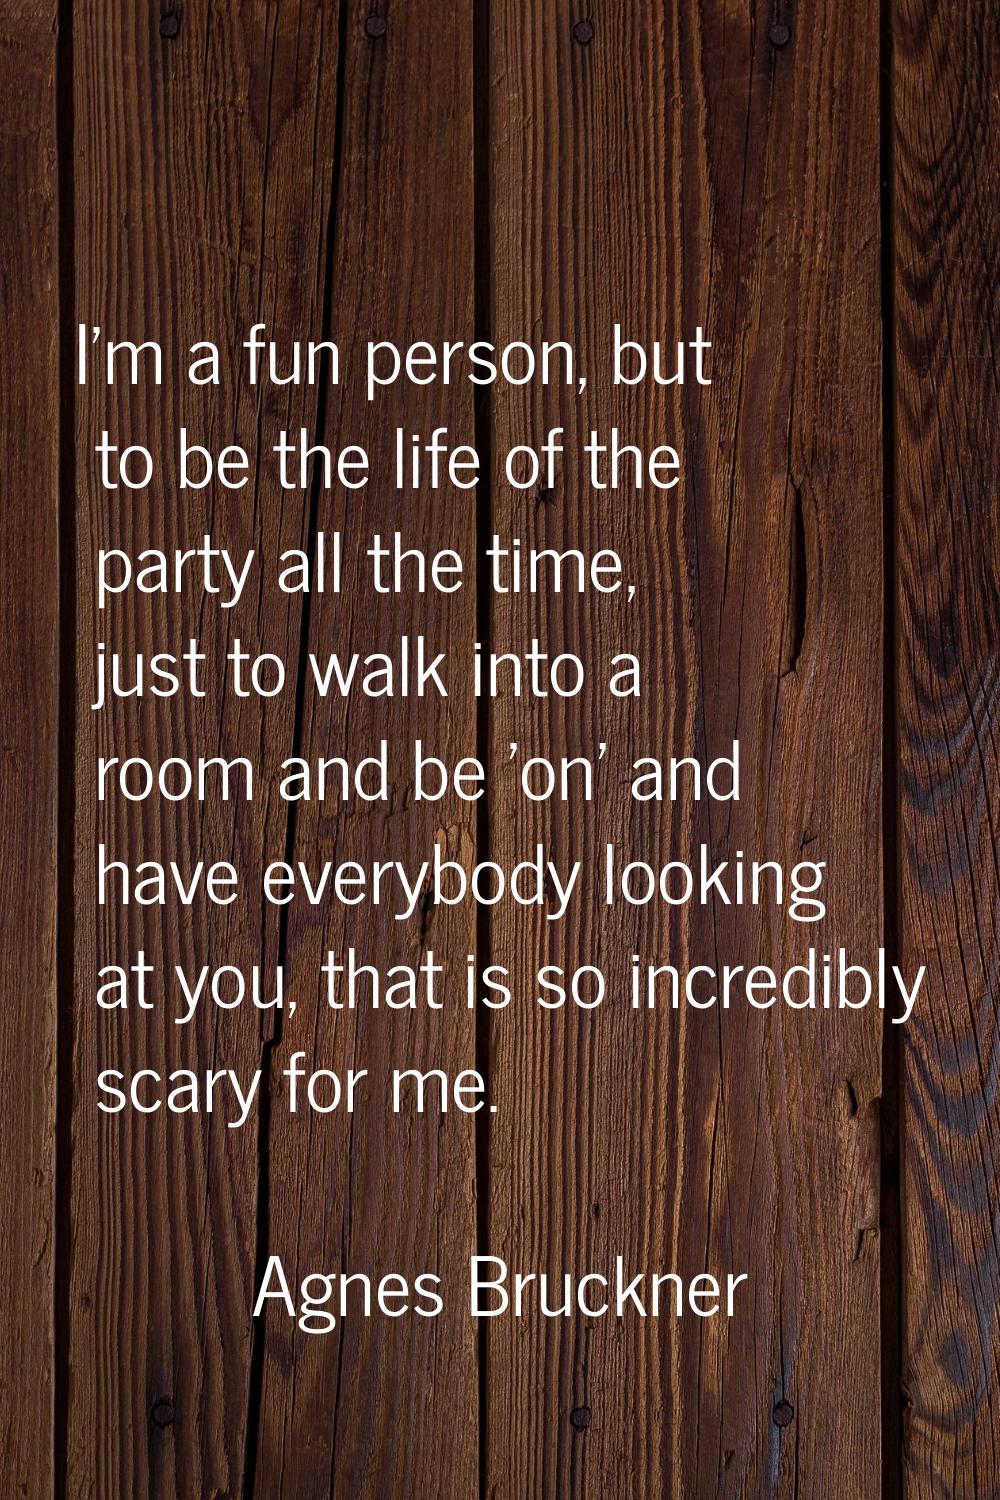 I'm a fun person, but to be the life of the party all the time, just to walk into a room and be 'on